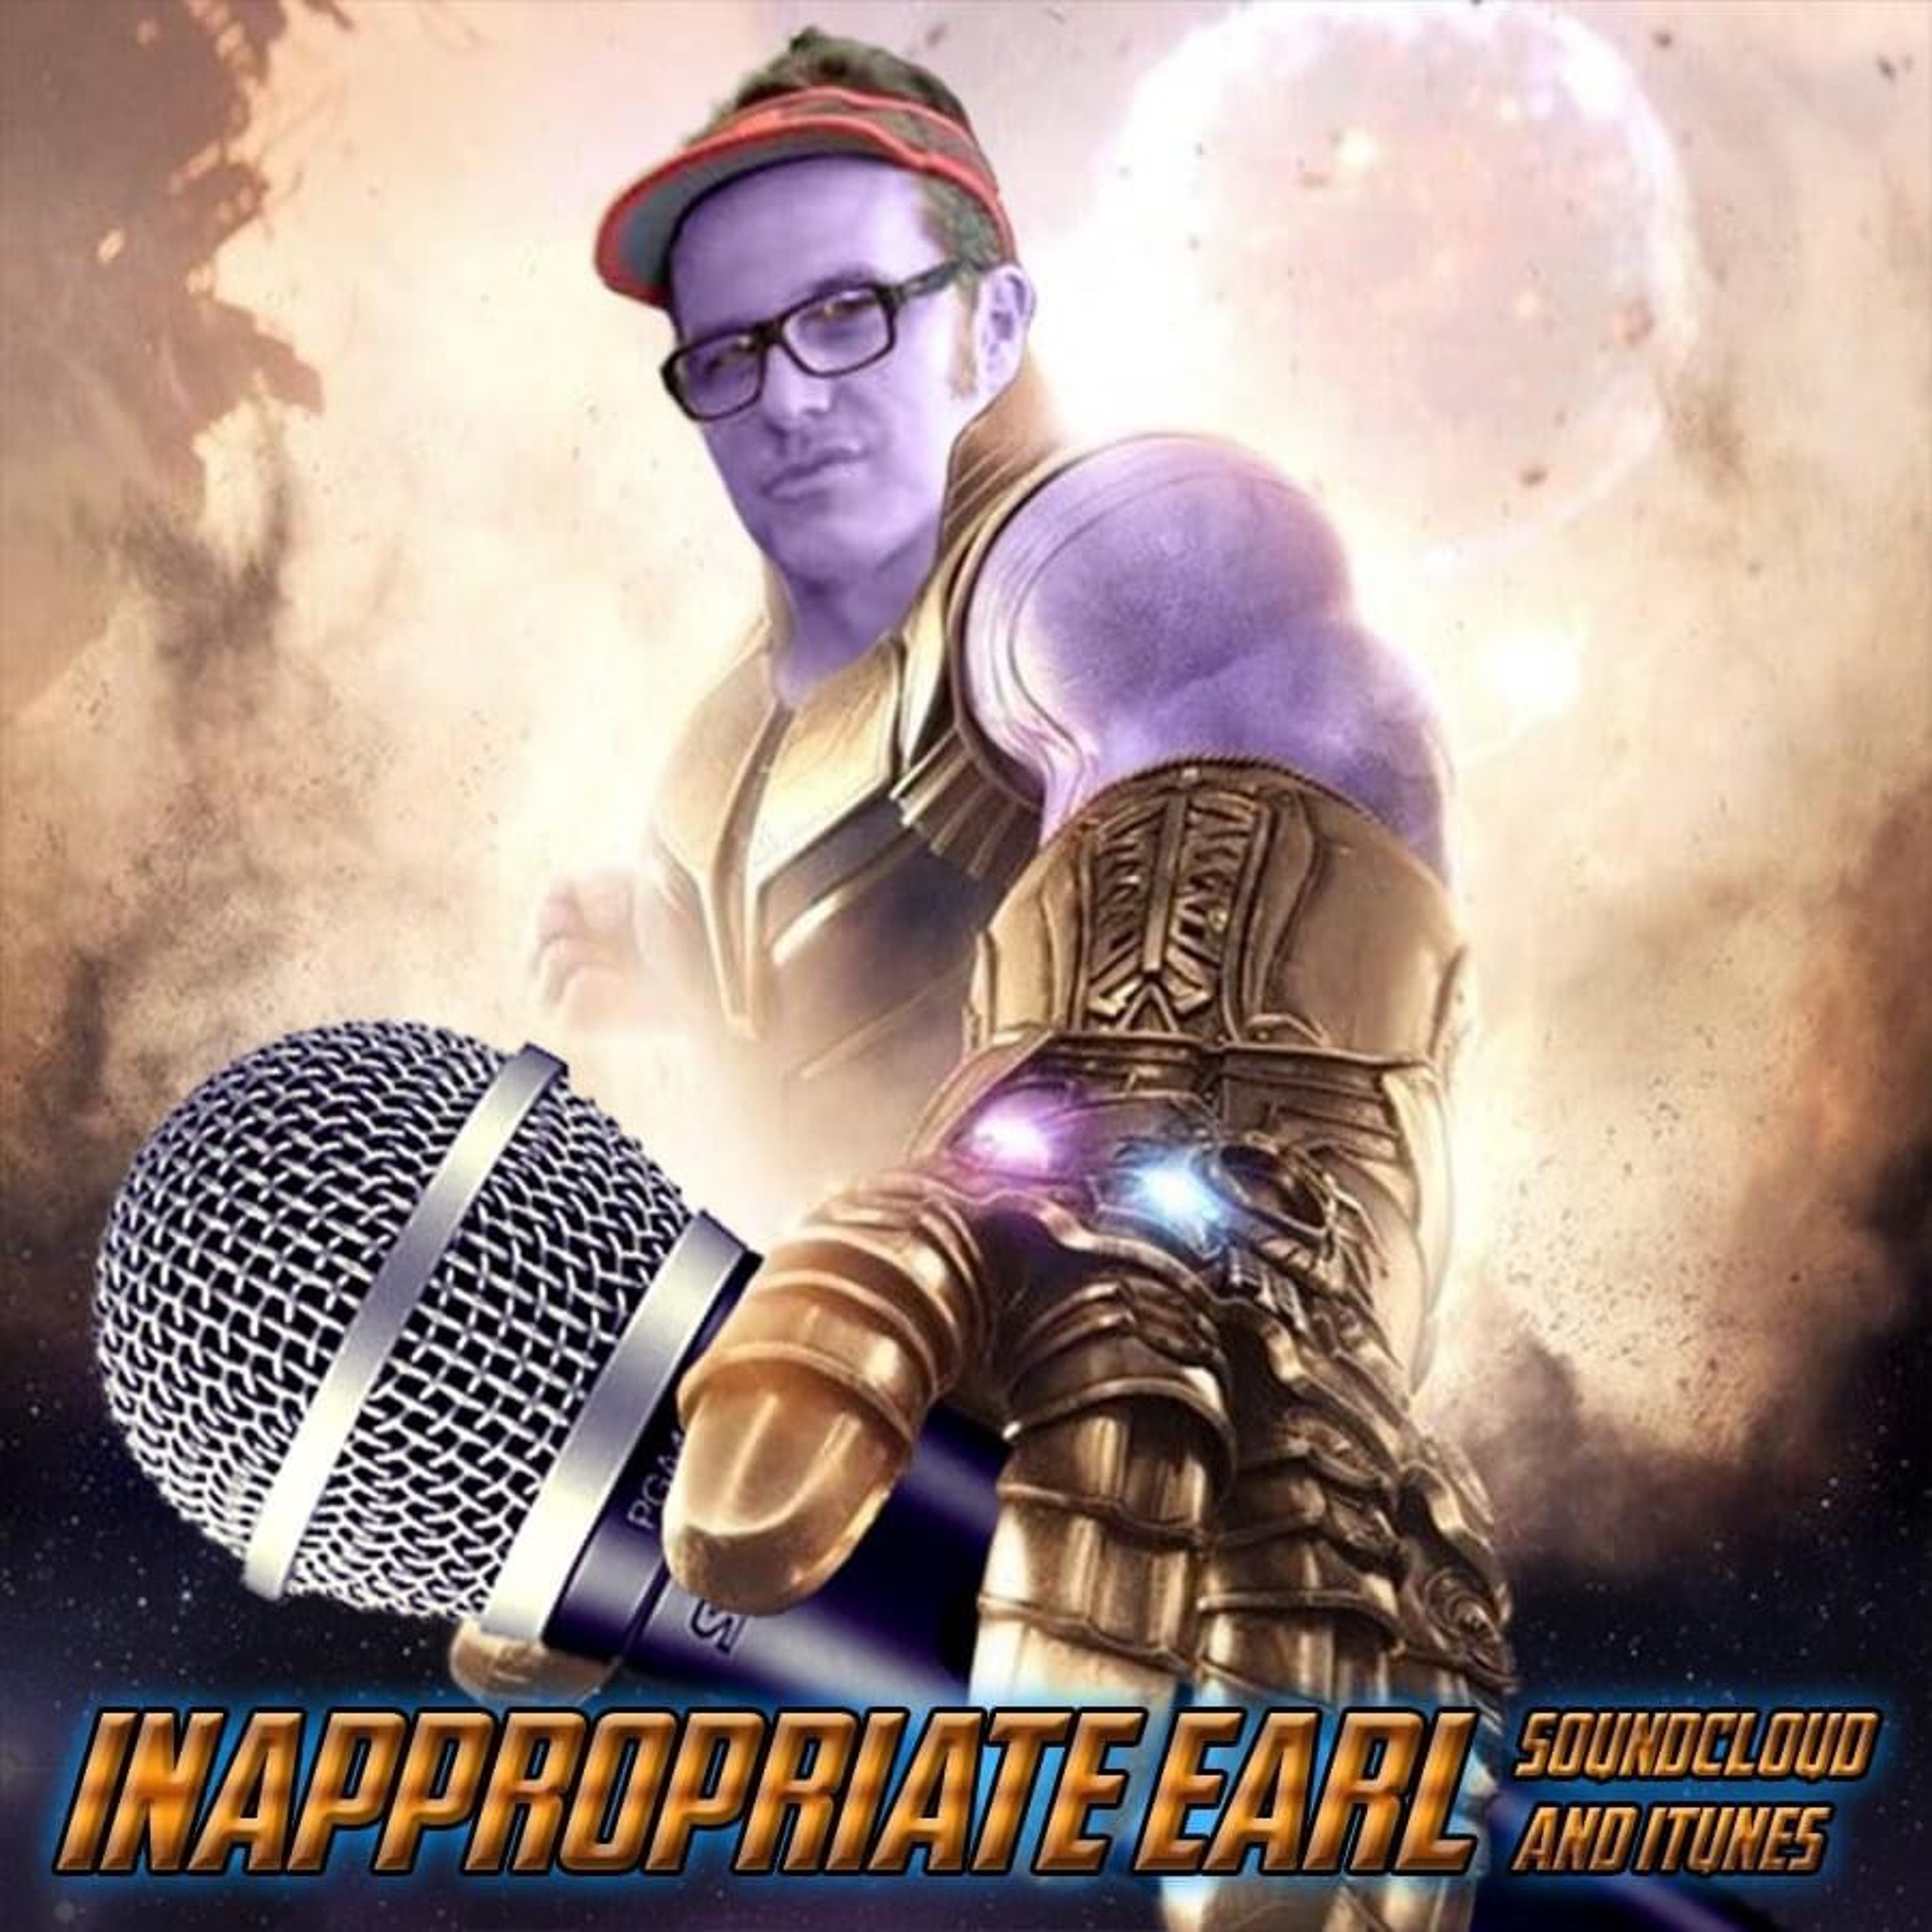 Episode 308 - Inappropriate Earl LIVE at The Comedy Store